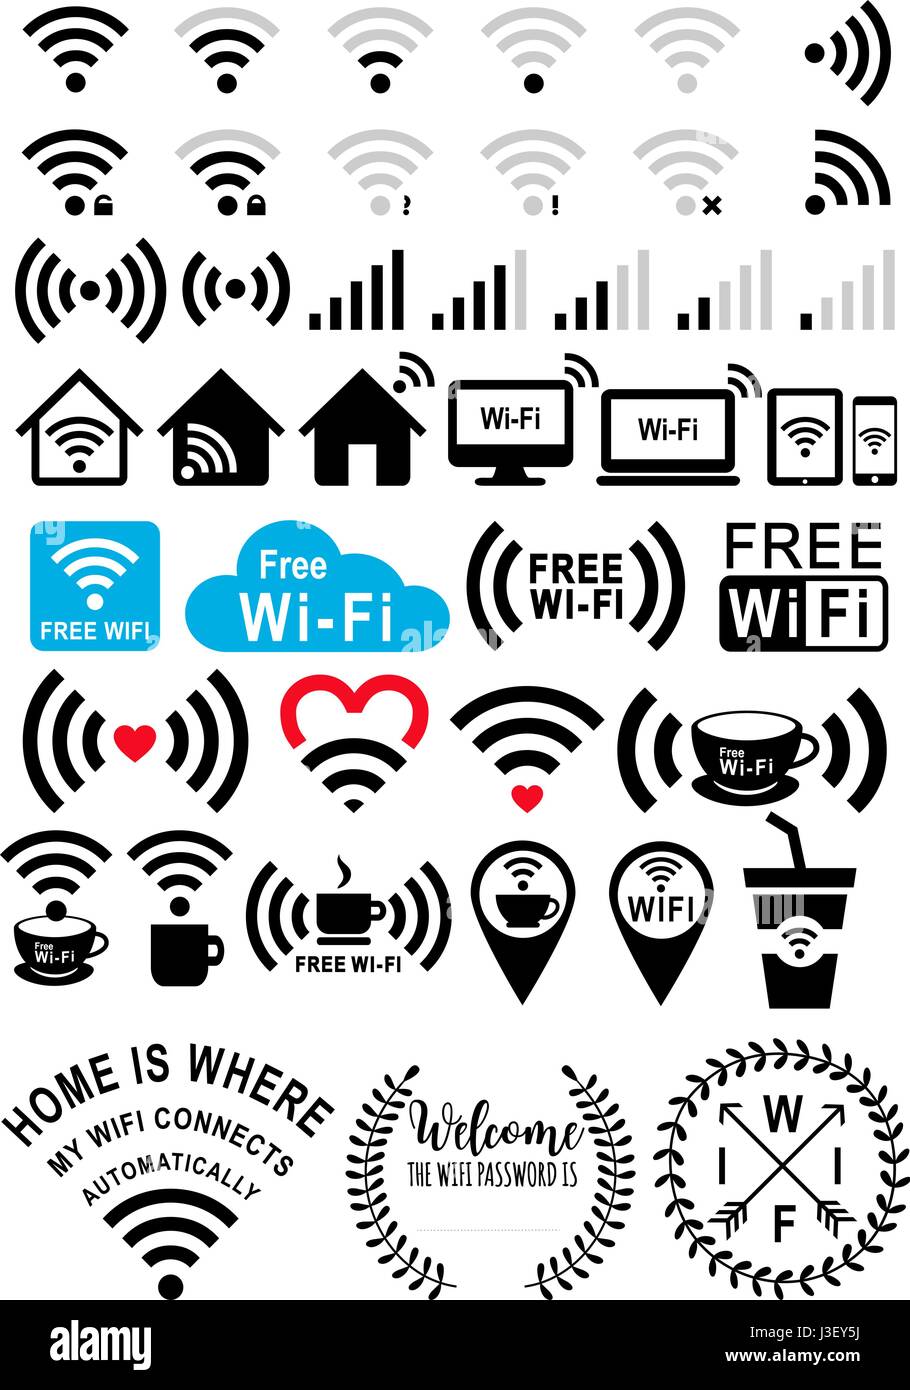 Wifi signs, wi-fi icons, coffee and free wifi zone, set of vector graphic design elements Stock Vector